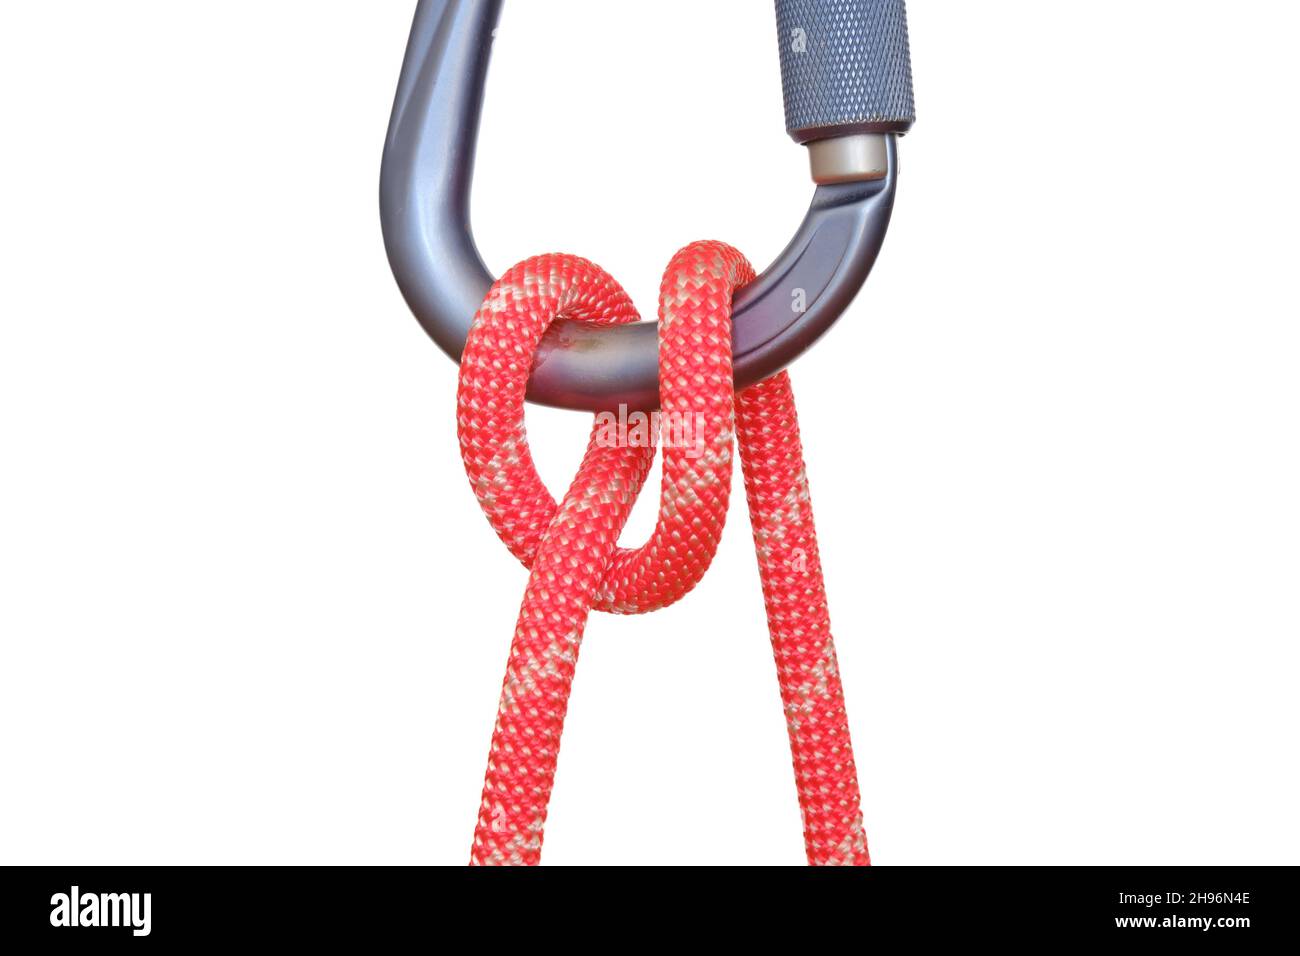 https://c8.alamy.com/comp/2H96N4E/munter-hitch-tied-with-red-rope-on-carabiner-isolated-on-white-background-this-adjustable-knot-used-in-climbing-is-also-called-the-italian-hitch-me-2H96N4E.jpg